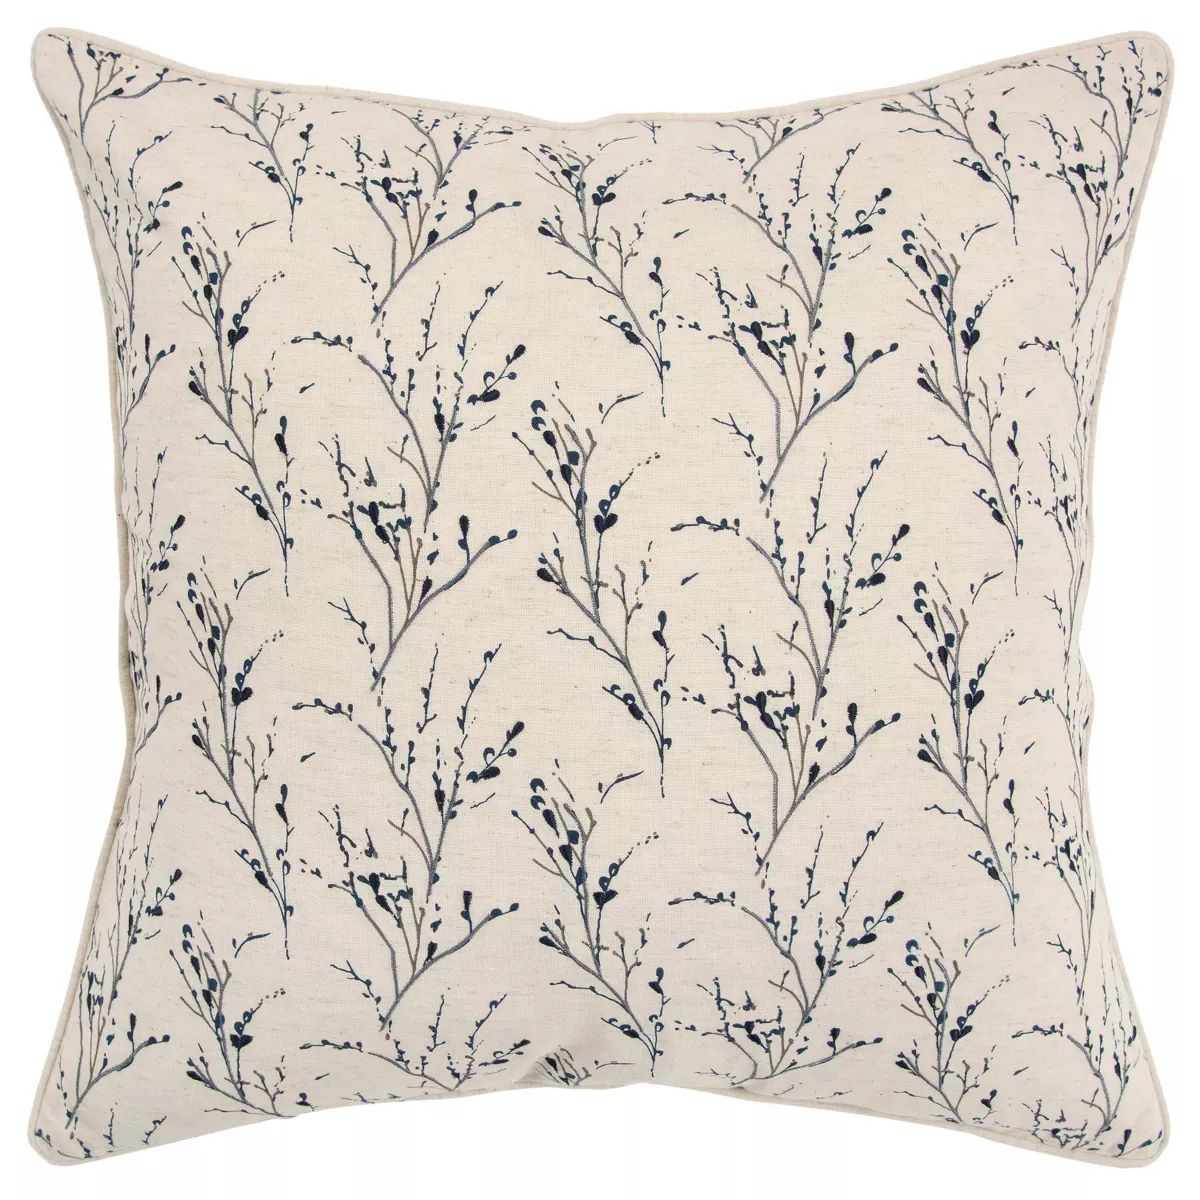 20"x20" Floral Polyester Filled Pillow - Rizzy Home | Target